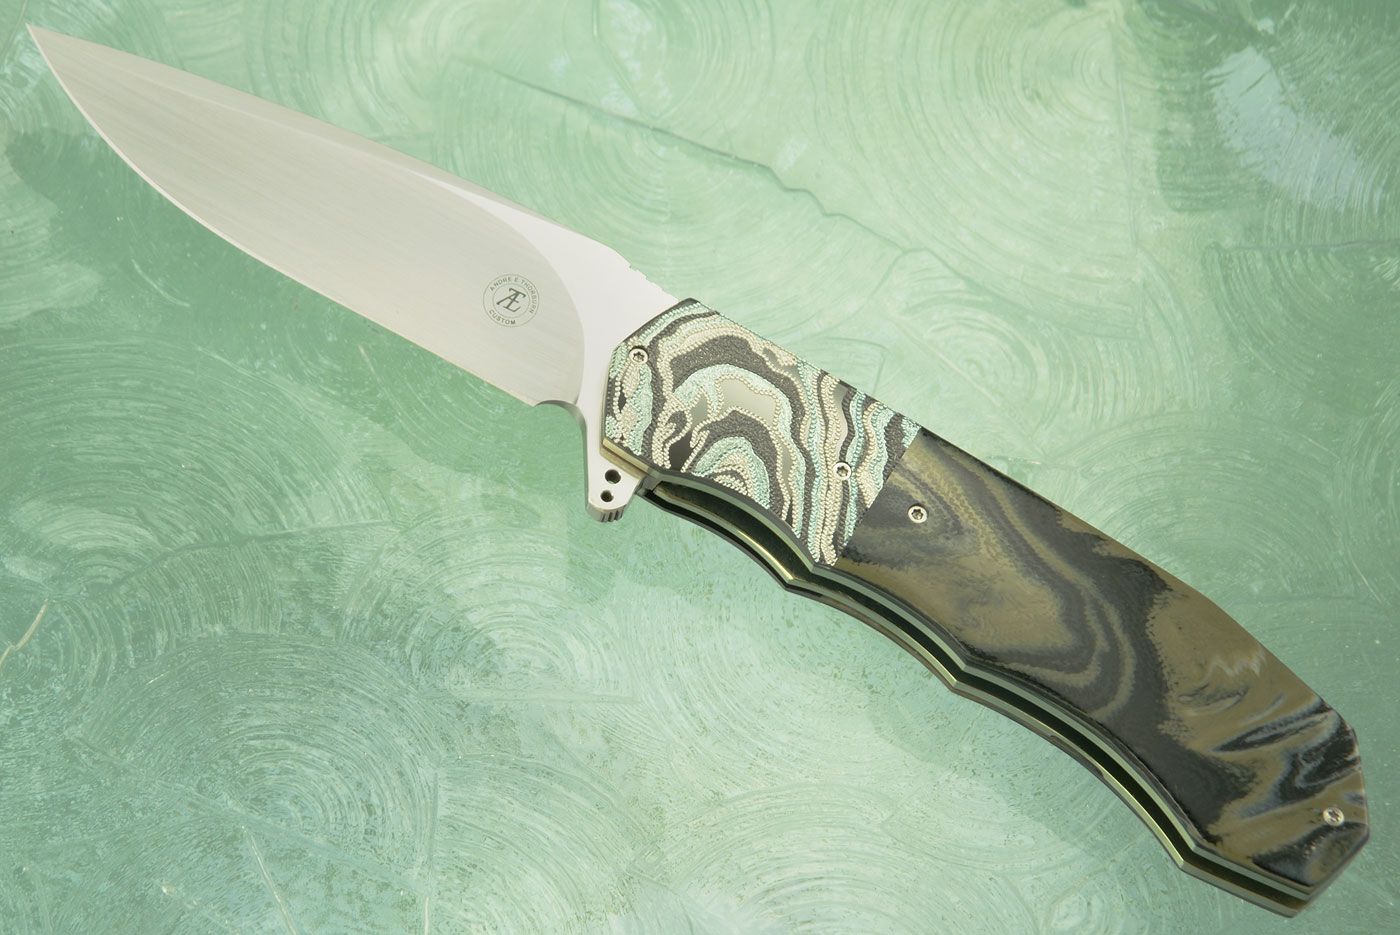 L44 Compact Flipper with Camo G10 and Zirconium (Ceramic IKBS) - CTS-XHP